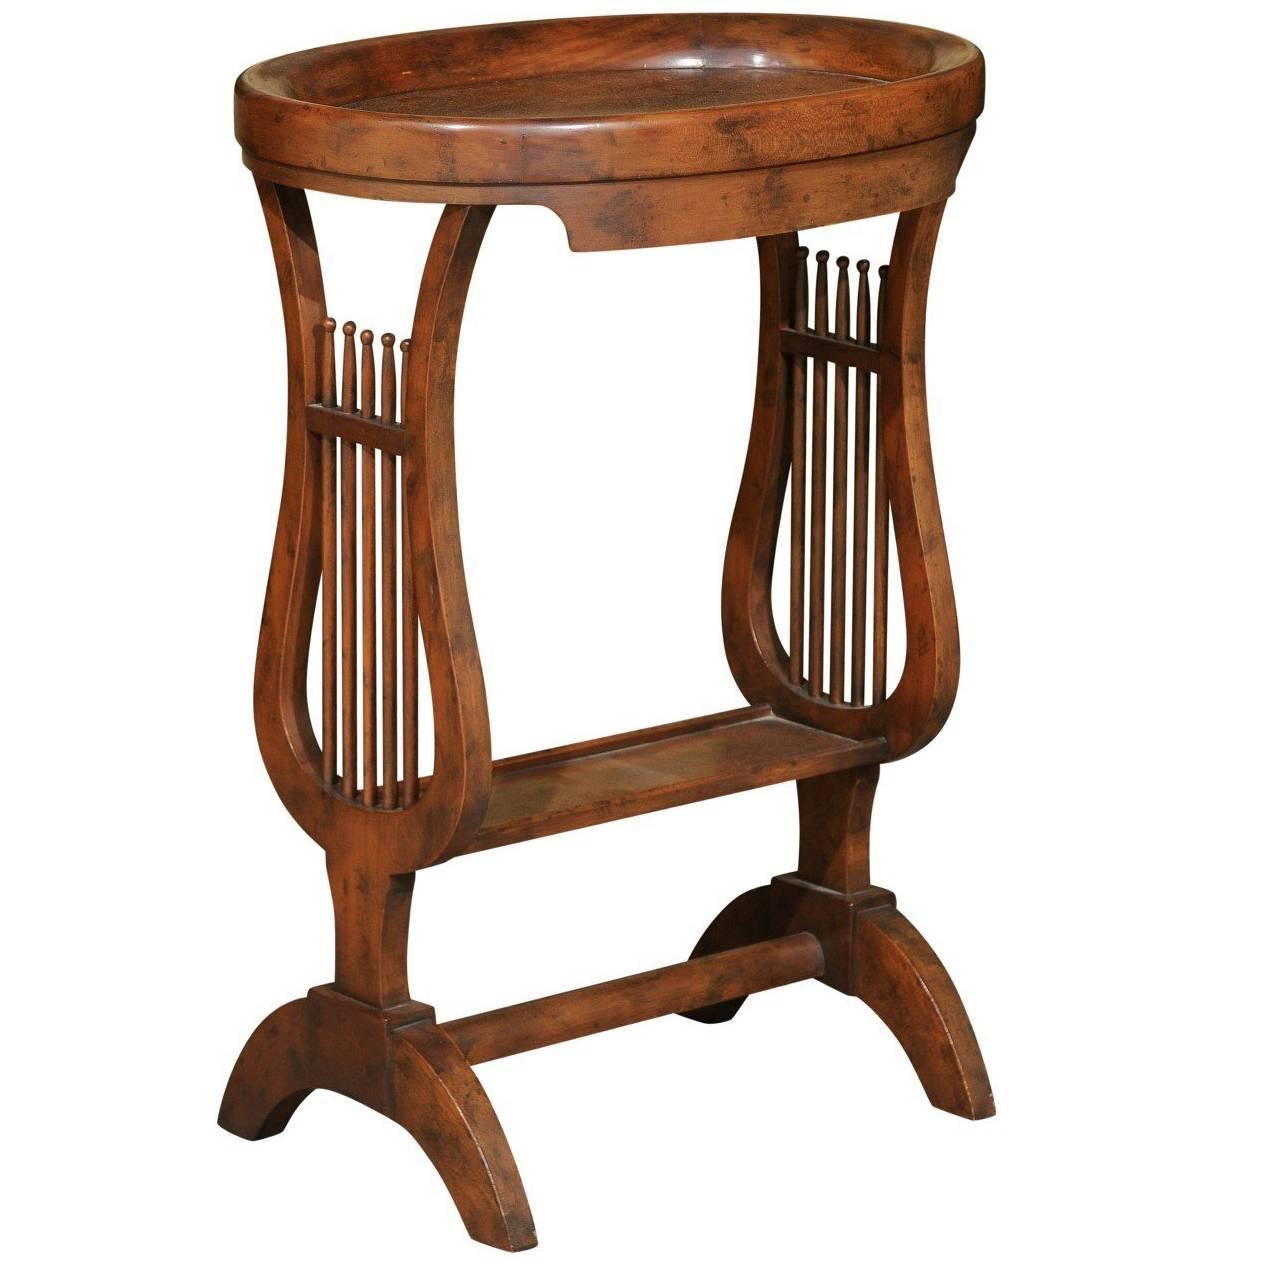 Vintage Italian Walnut Side Table with Lyre-Shaped Legs and Oval Tray Top